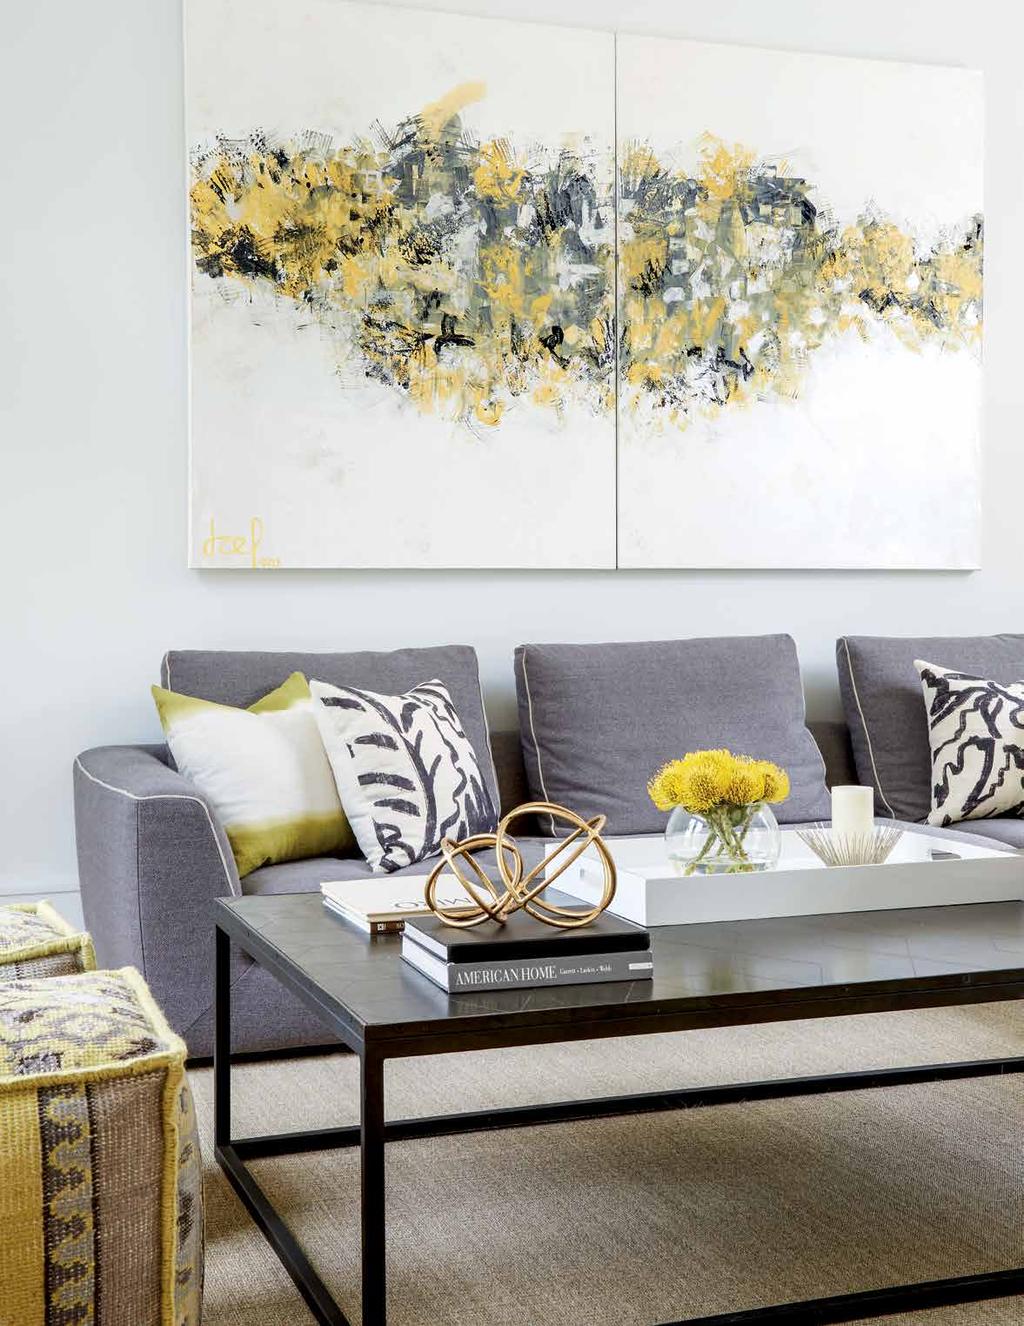 Another painting by Concha sets the tone for the modern family room.